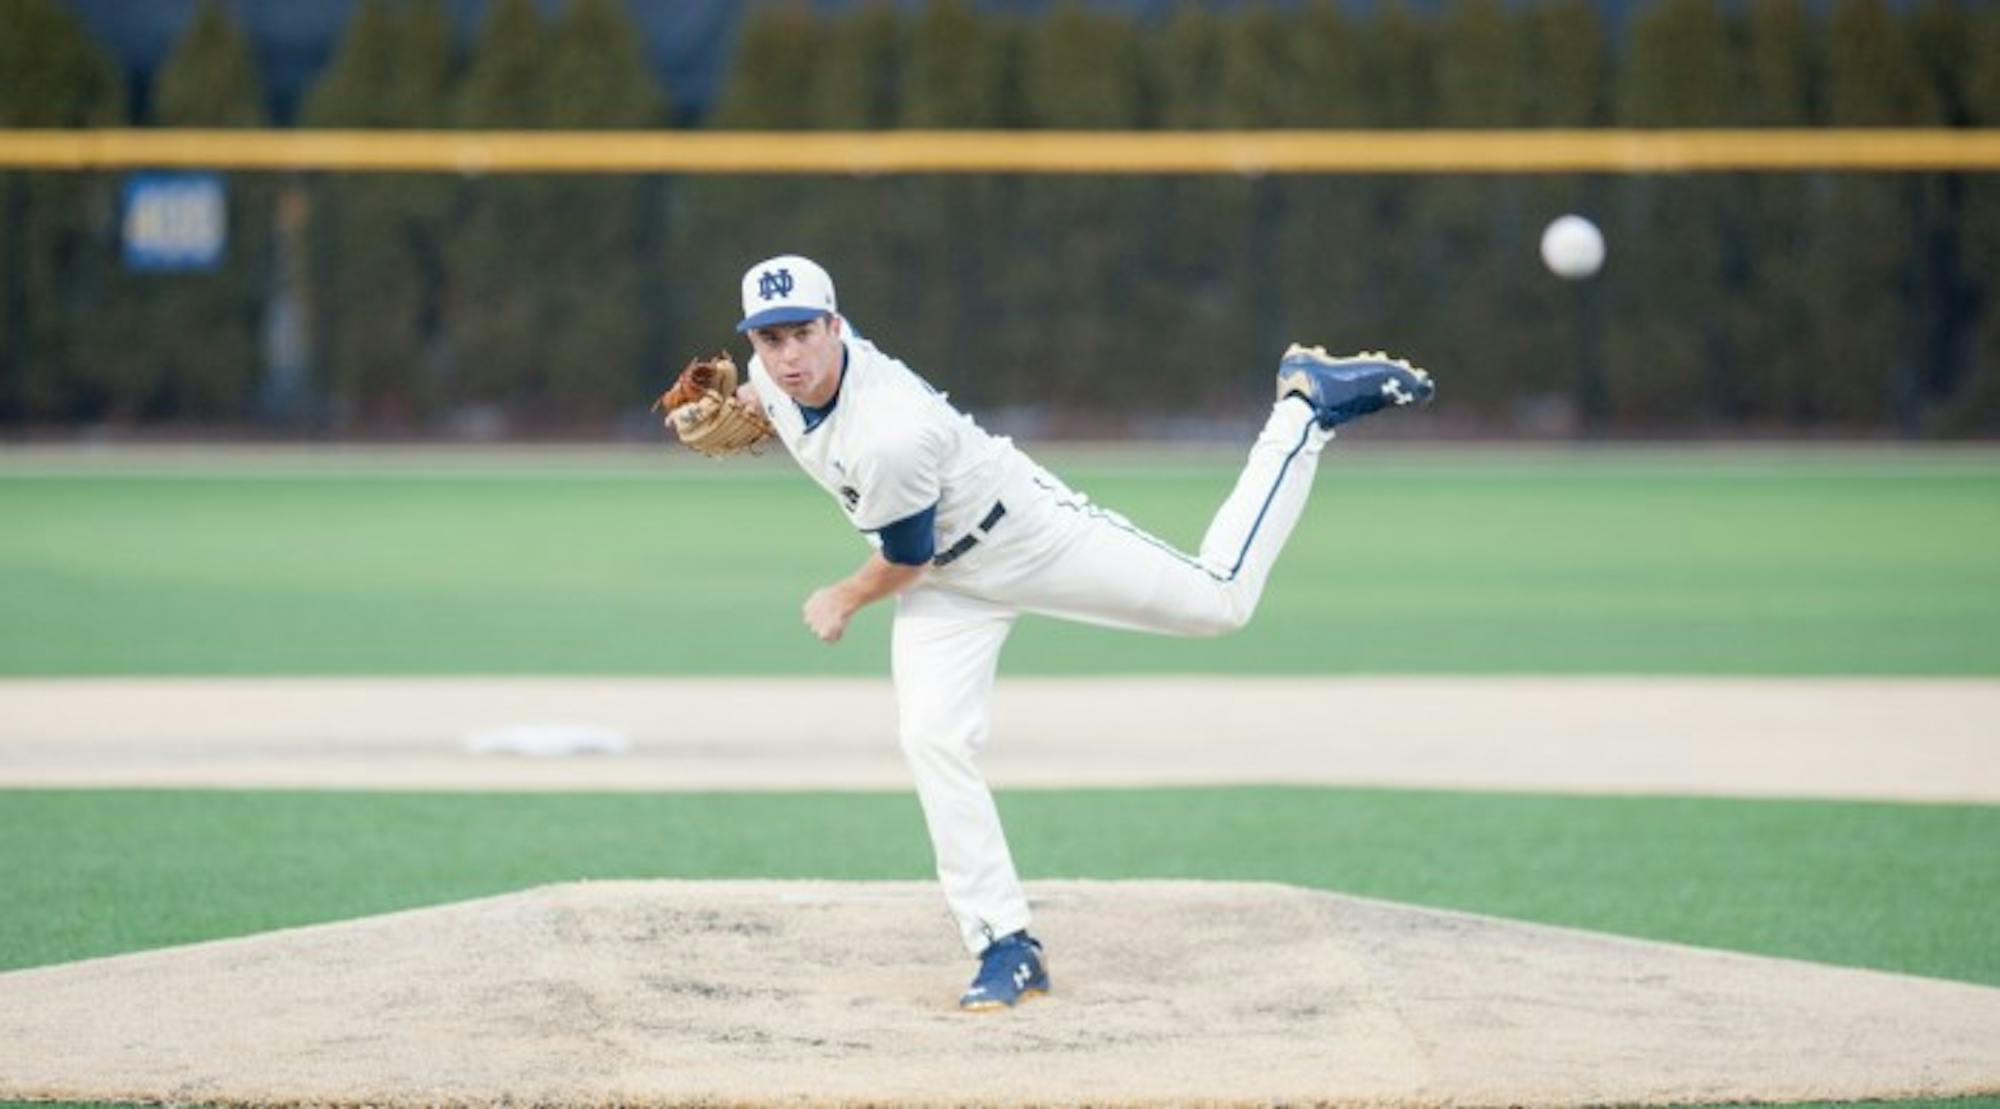 Sophomore left-hander Scott Tully delivers a pitch during Notre Dame’s 8-3 win over Central Michigan on March 18.